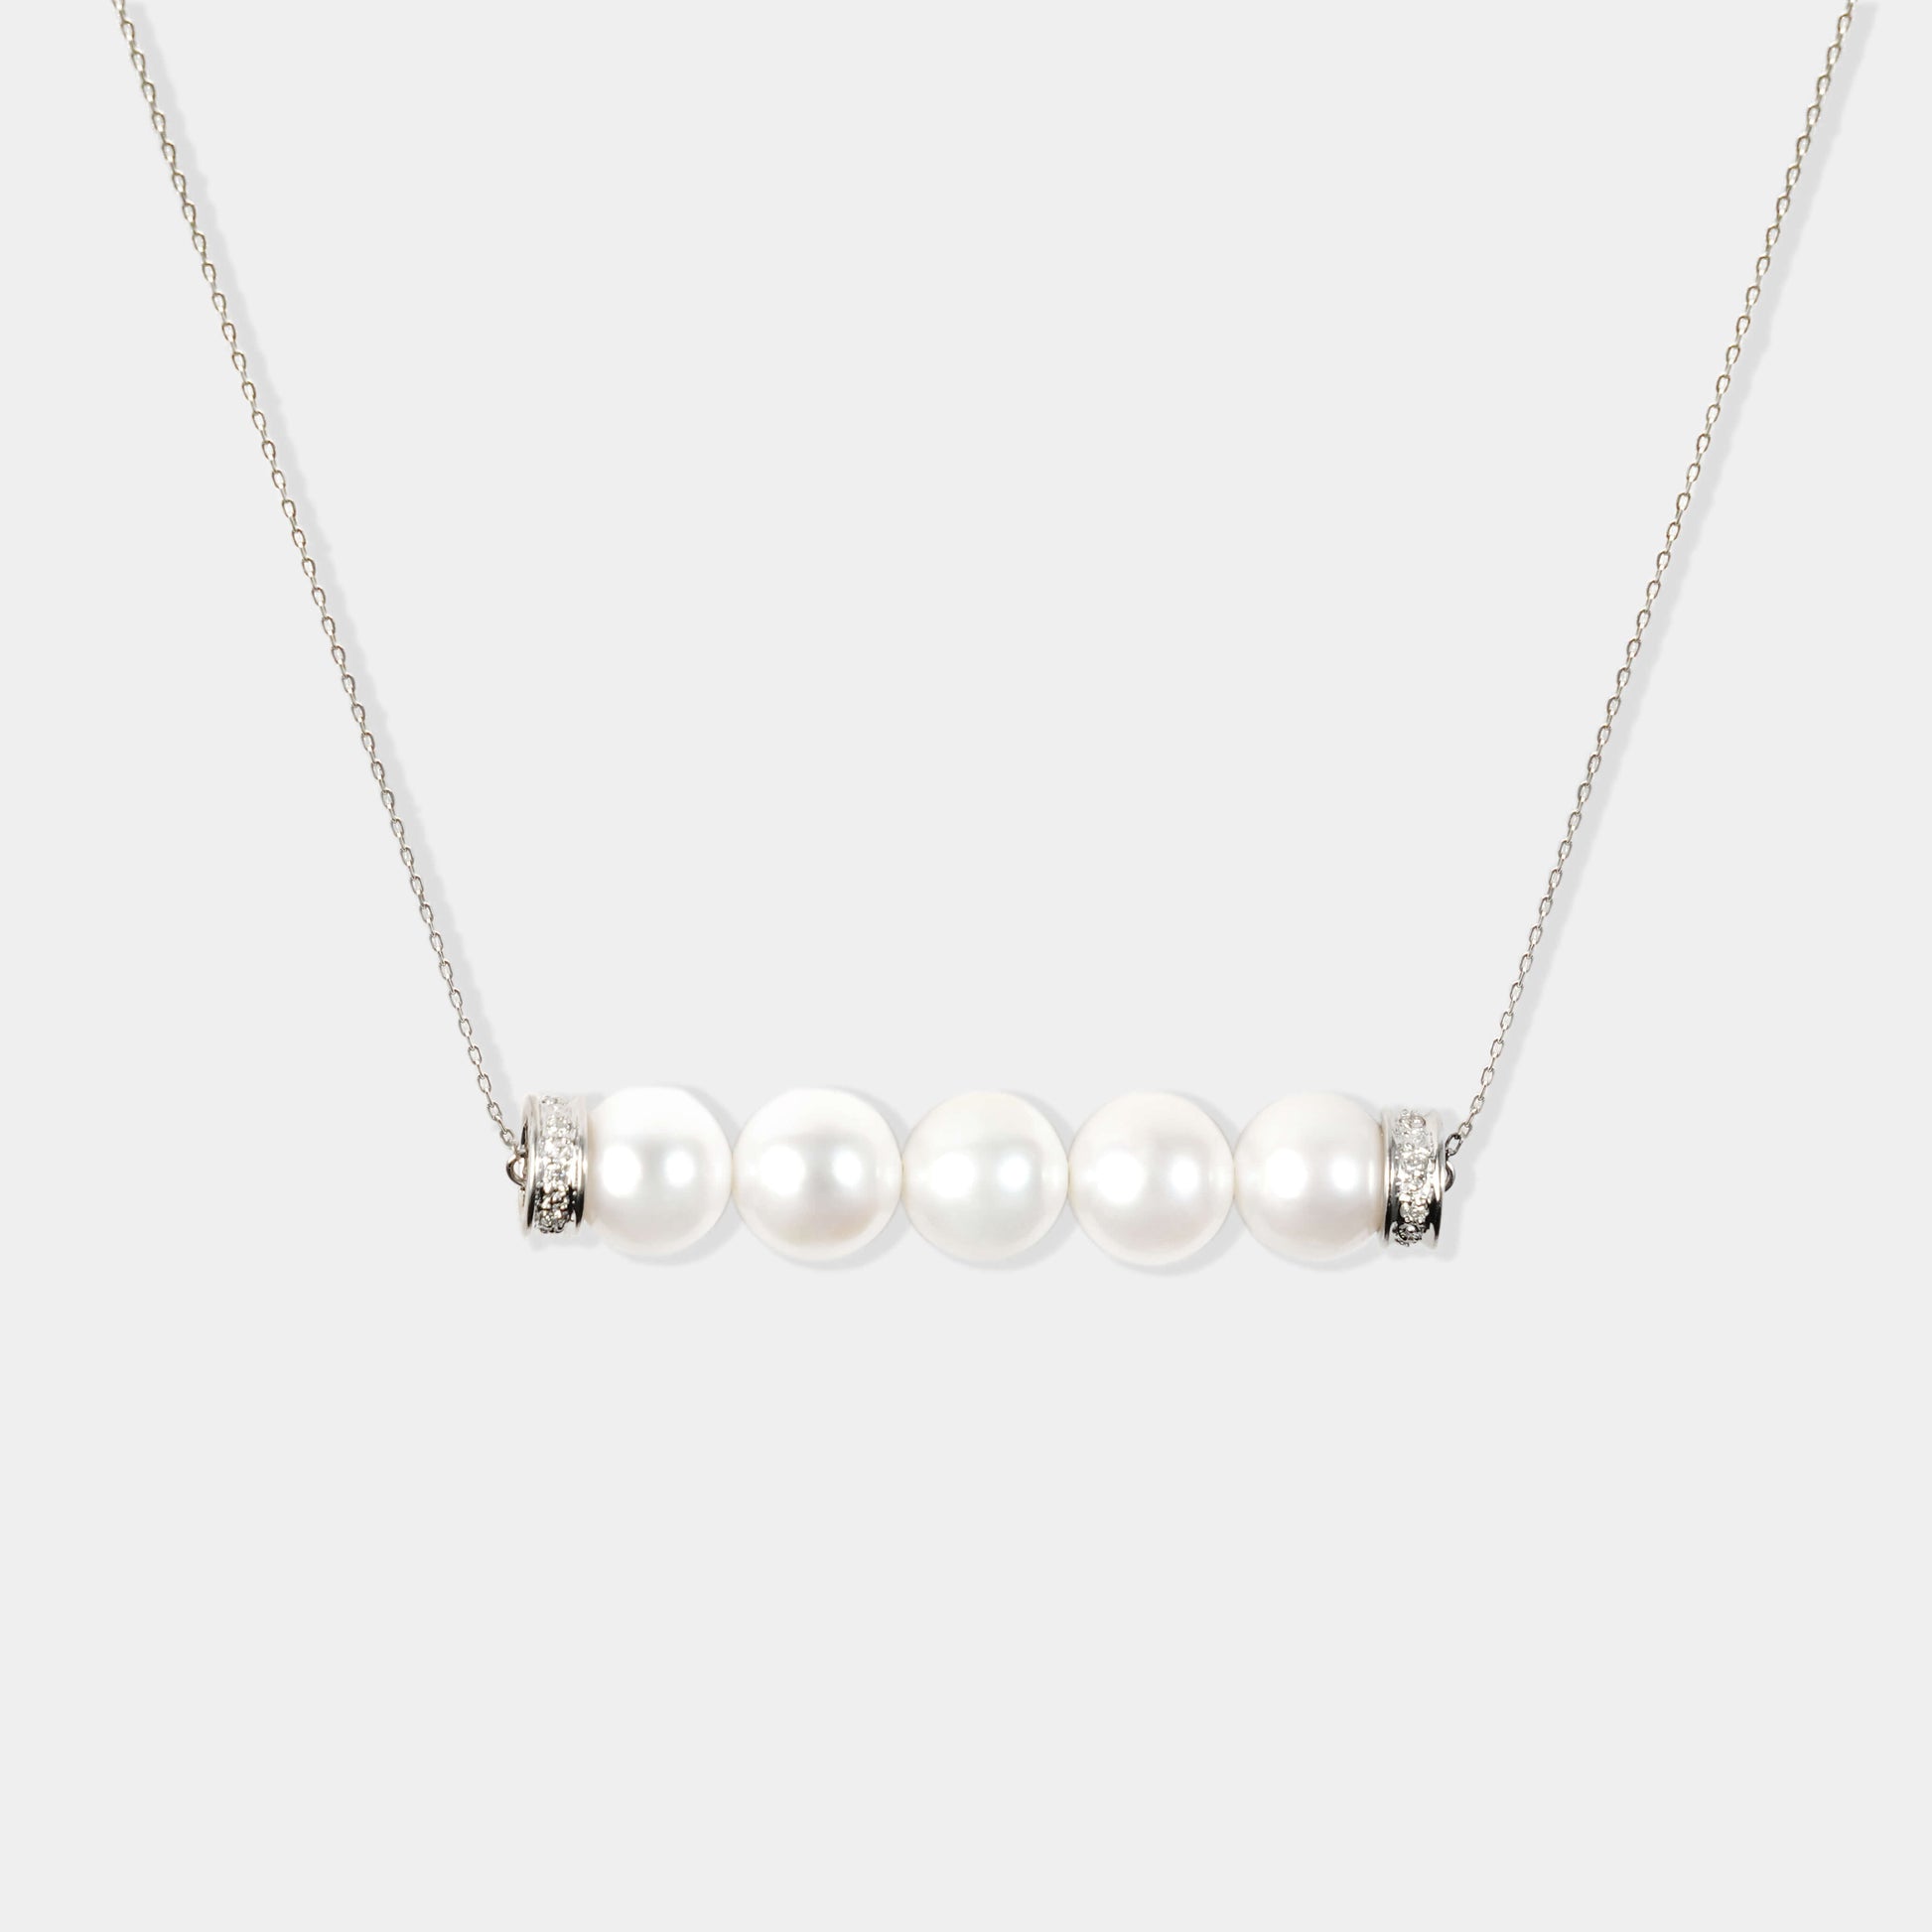 Beautiful White Gold Chain and Pearl Necklace